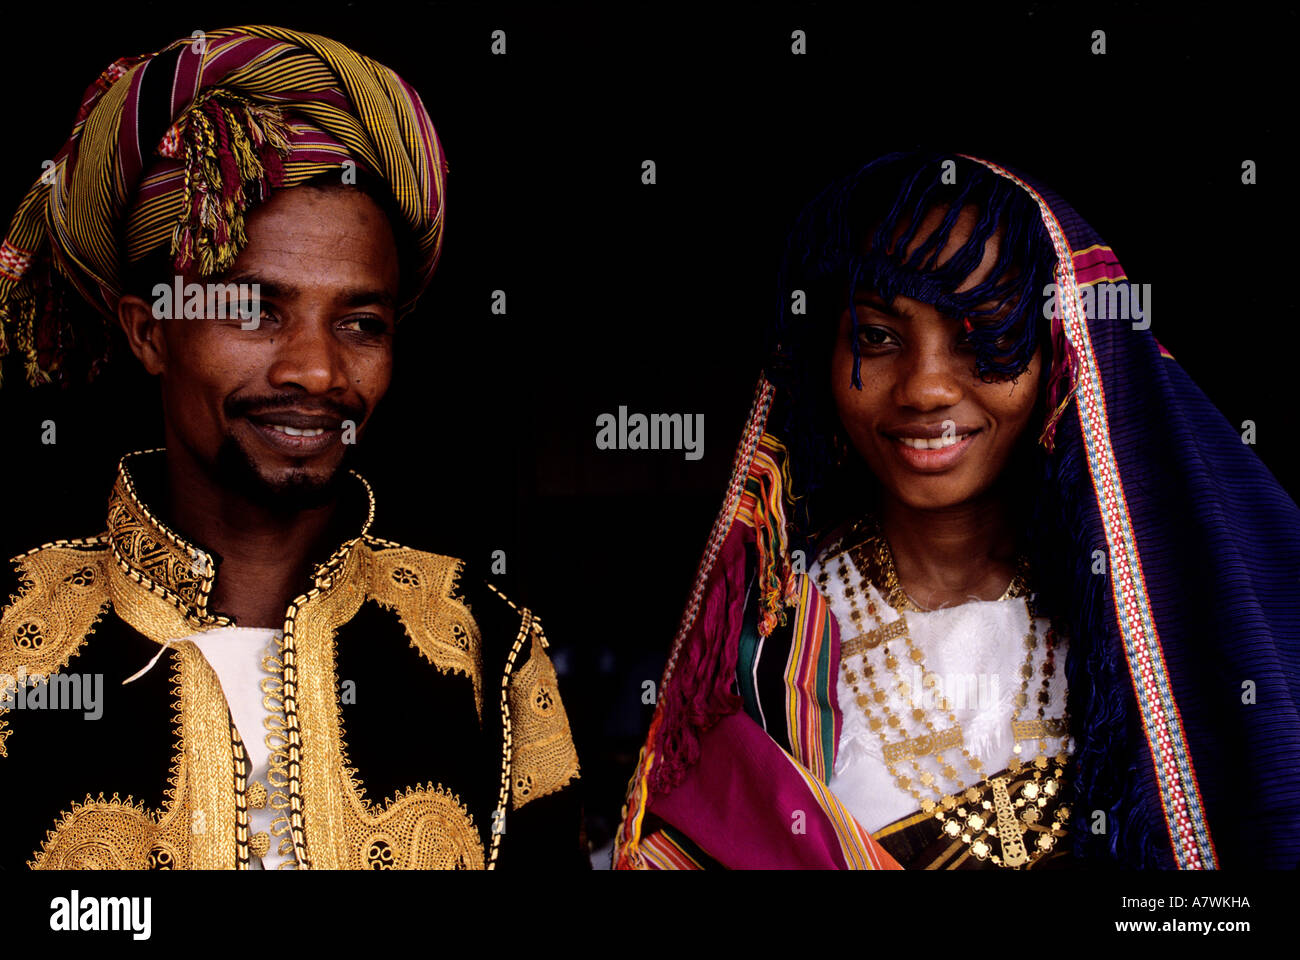 Comoros Republic, Anjouan islands, couple of newly-weds wearing traditional costumes Stock Photo